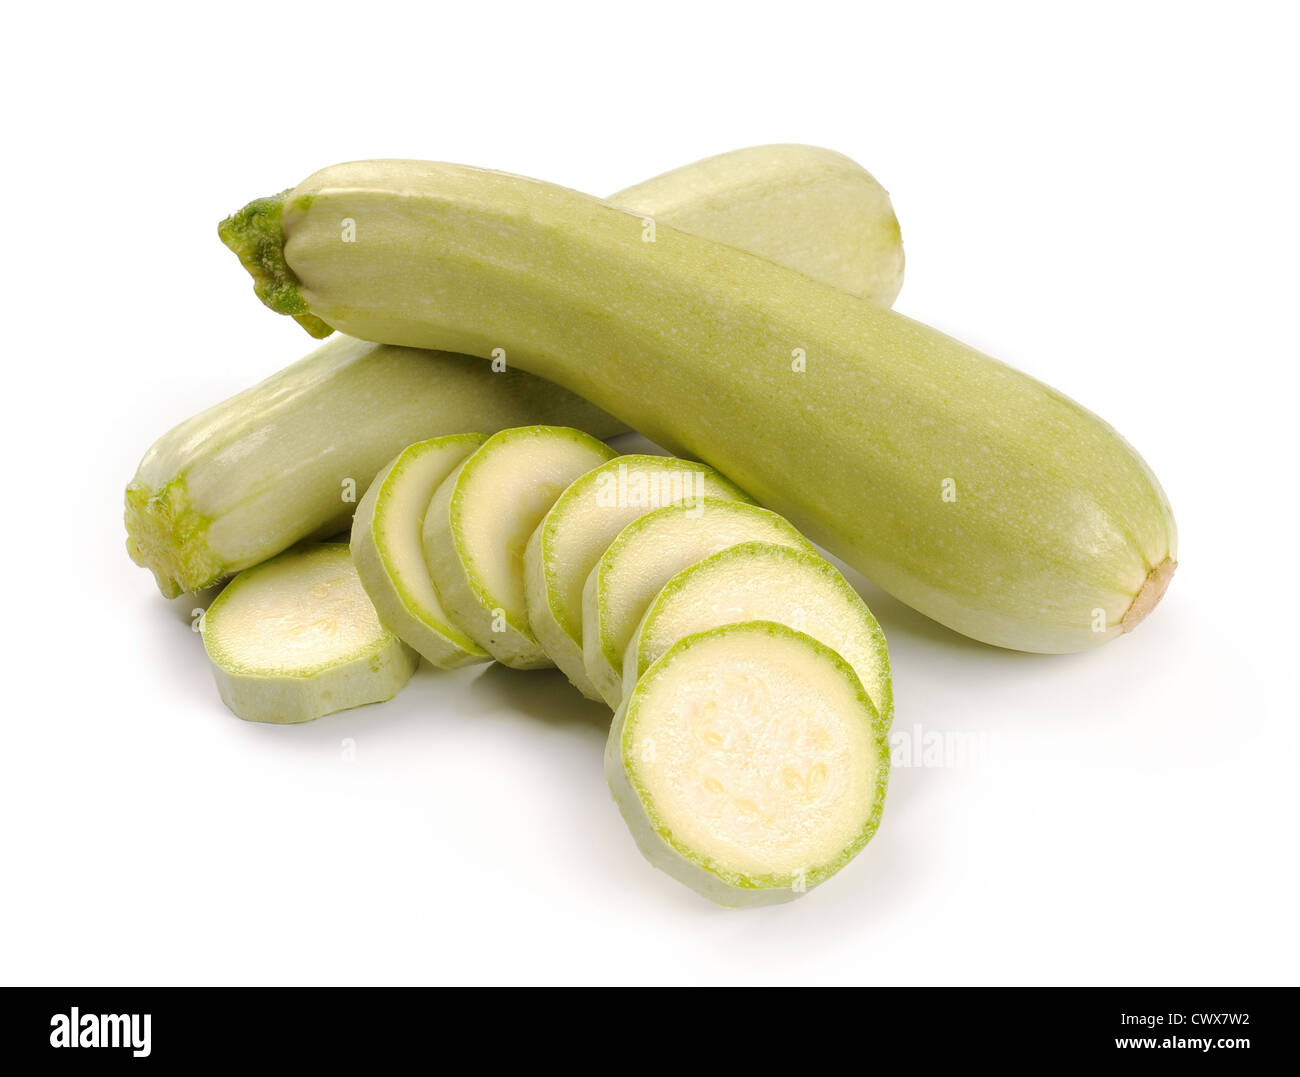 courgette on a white background Stock Photo